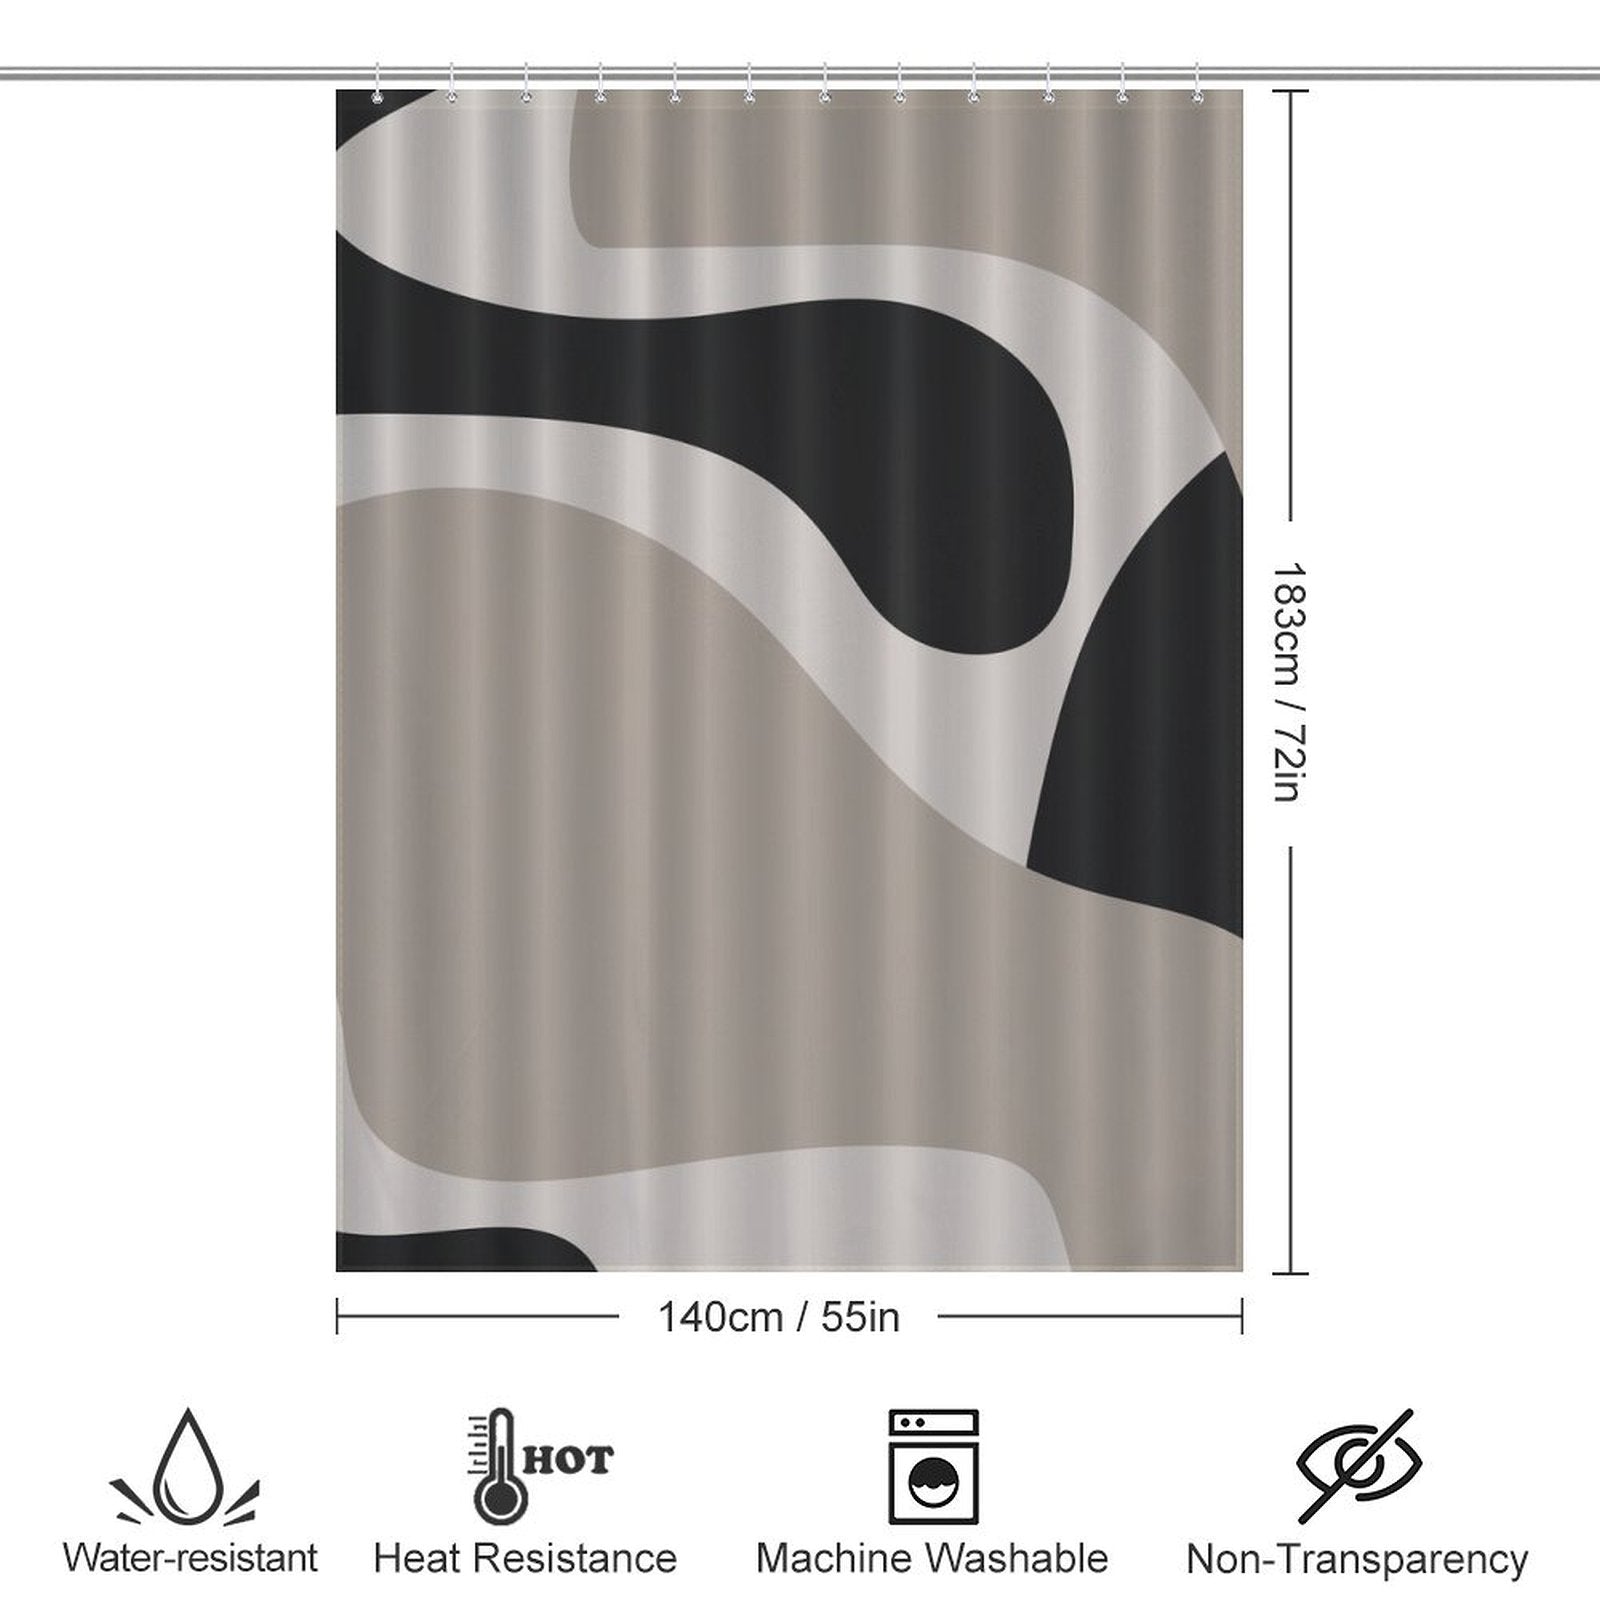 A Cotton Cat Modern Geometric Art Minimalist Curve Beige Black and Grey Abstract Shower Curtain measuring 140 cm by 183 cm. It is water-resistant, heat-resistant, machine washable, and non-transparent—perfect for adding a touch of modern geometric art to your bathroom decor.